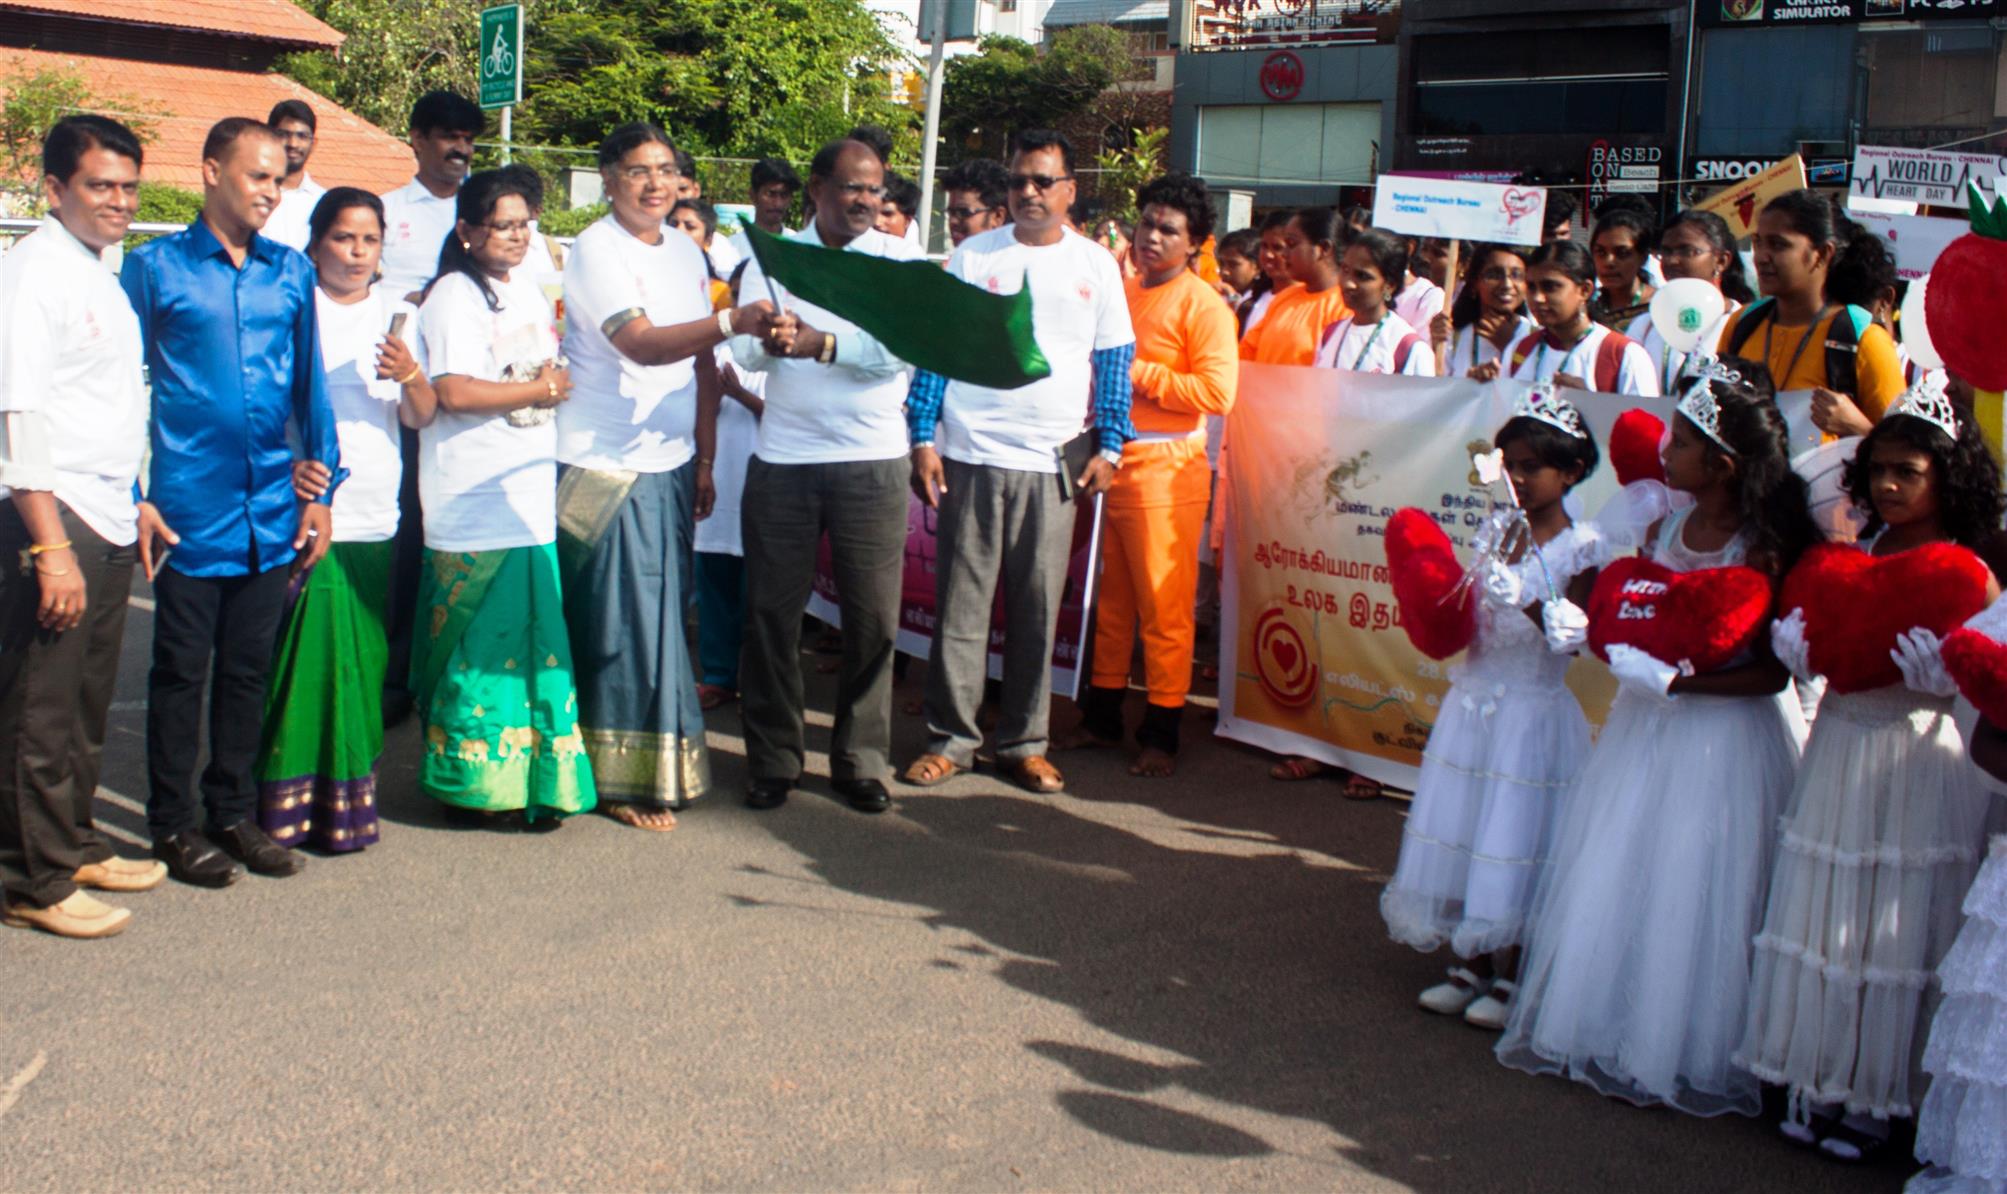 Shri. E. Mariappan, Additional Director General, Press Information Bureau, and Regional Outreach Bureau, and Dr. A. Roshini Arthur, Senior Regional Director, Health and Family Welfare, Government of India flagging off the rally to mark the celebration of the World Heart Day, 2019 and FIT India mission organized jointly by Regional Outreach Bureau, Ministry of Information & Broadcasting, Chennai and Good will Trust, Chennai